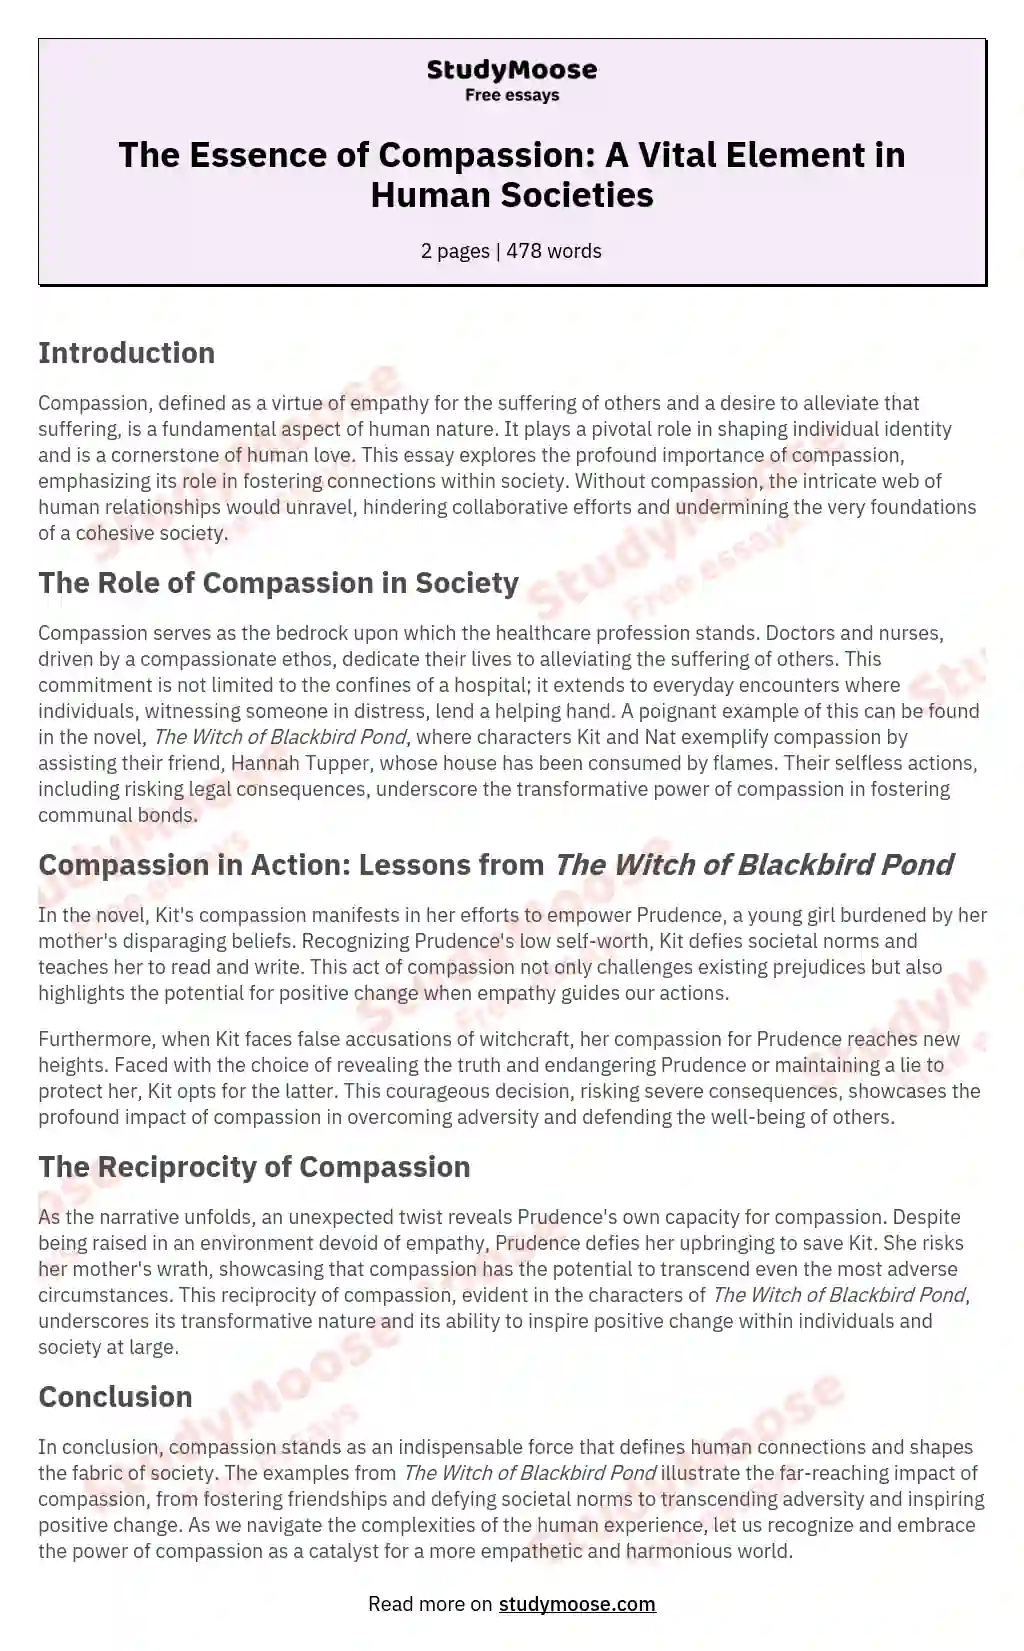 The Essence of Compassion: A Vital Element in Human Societies essay